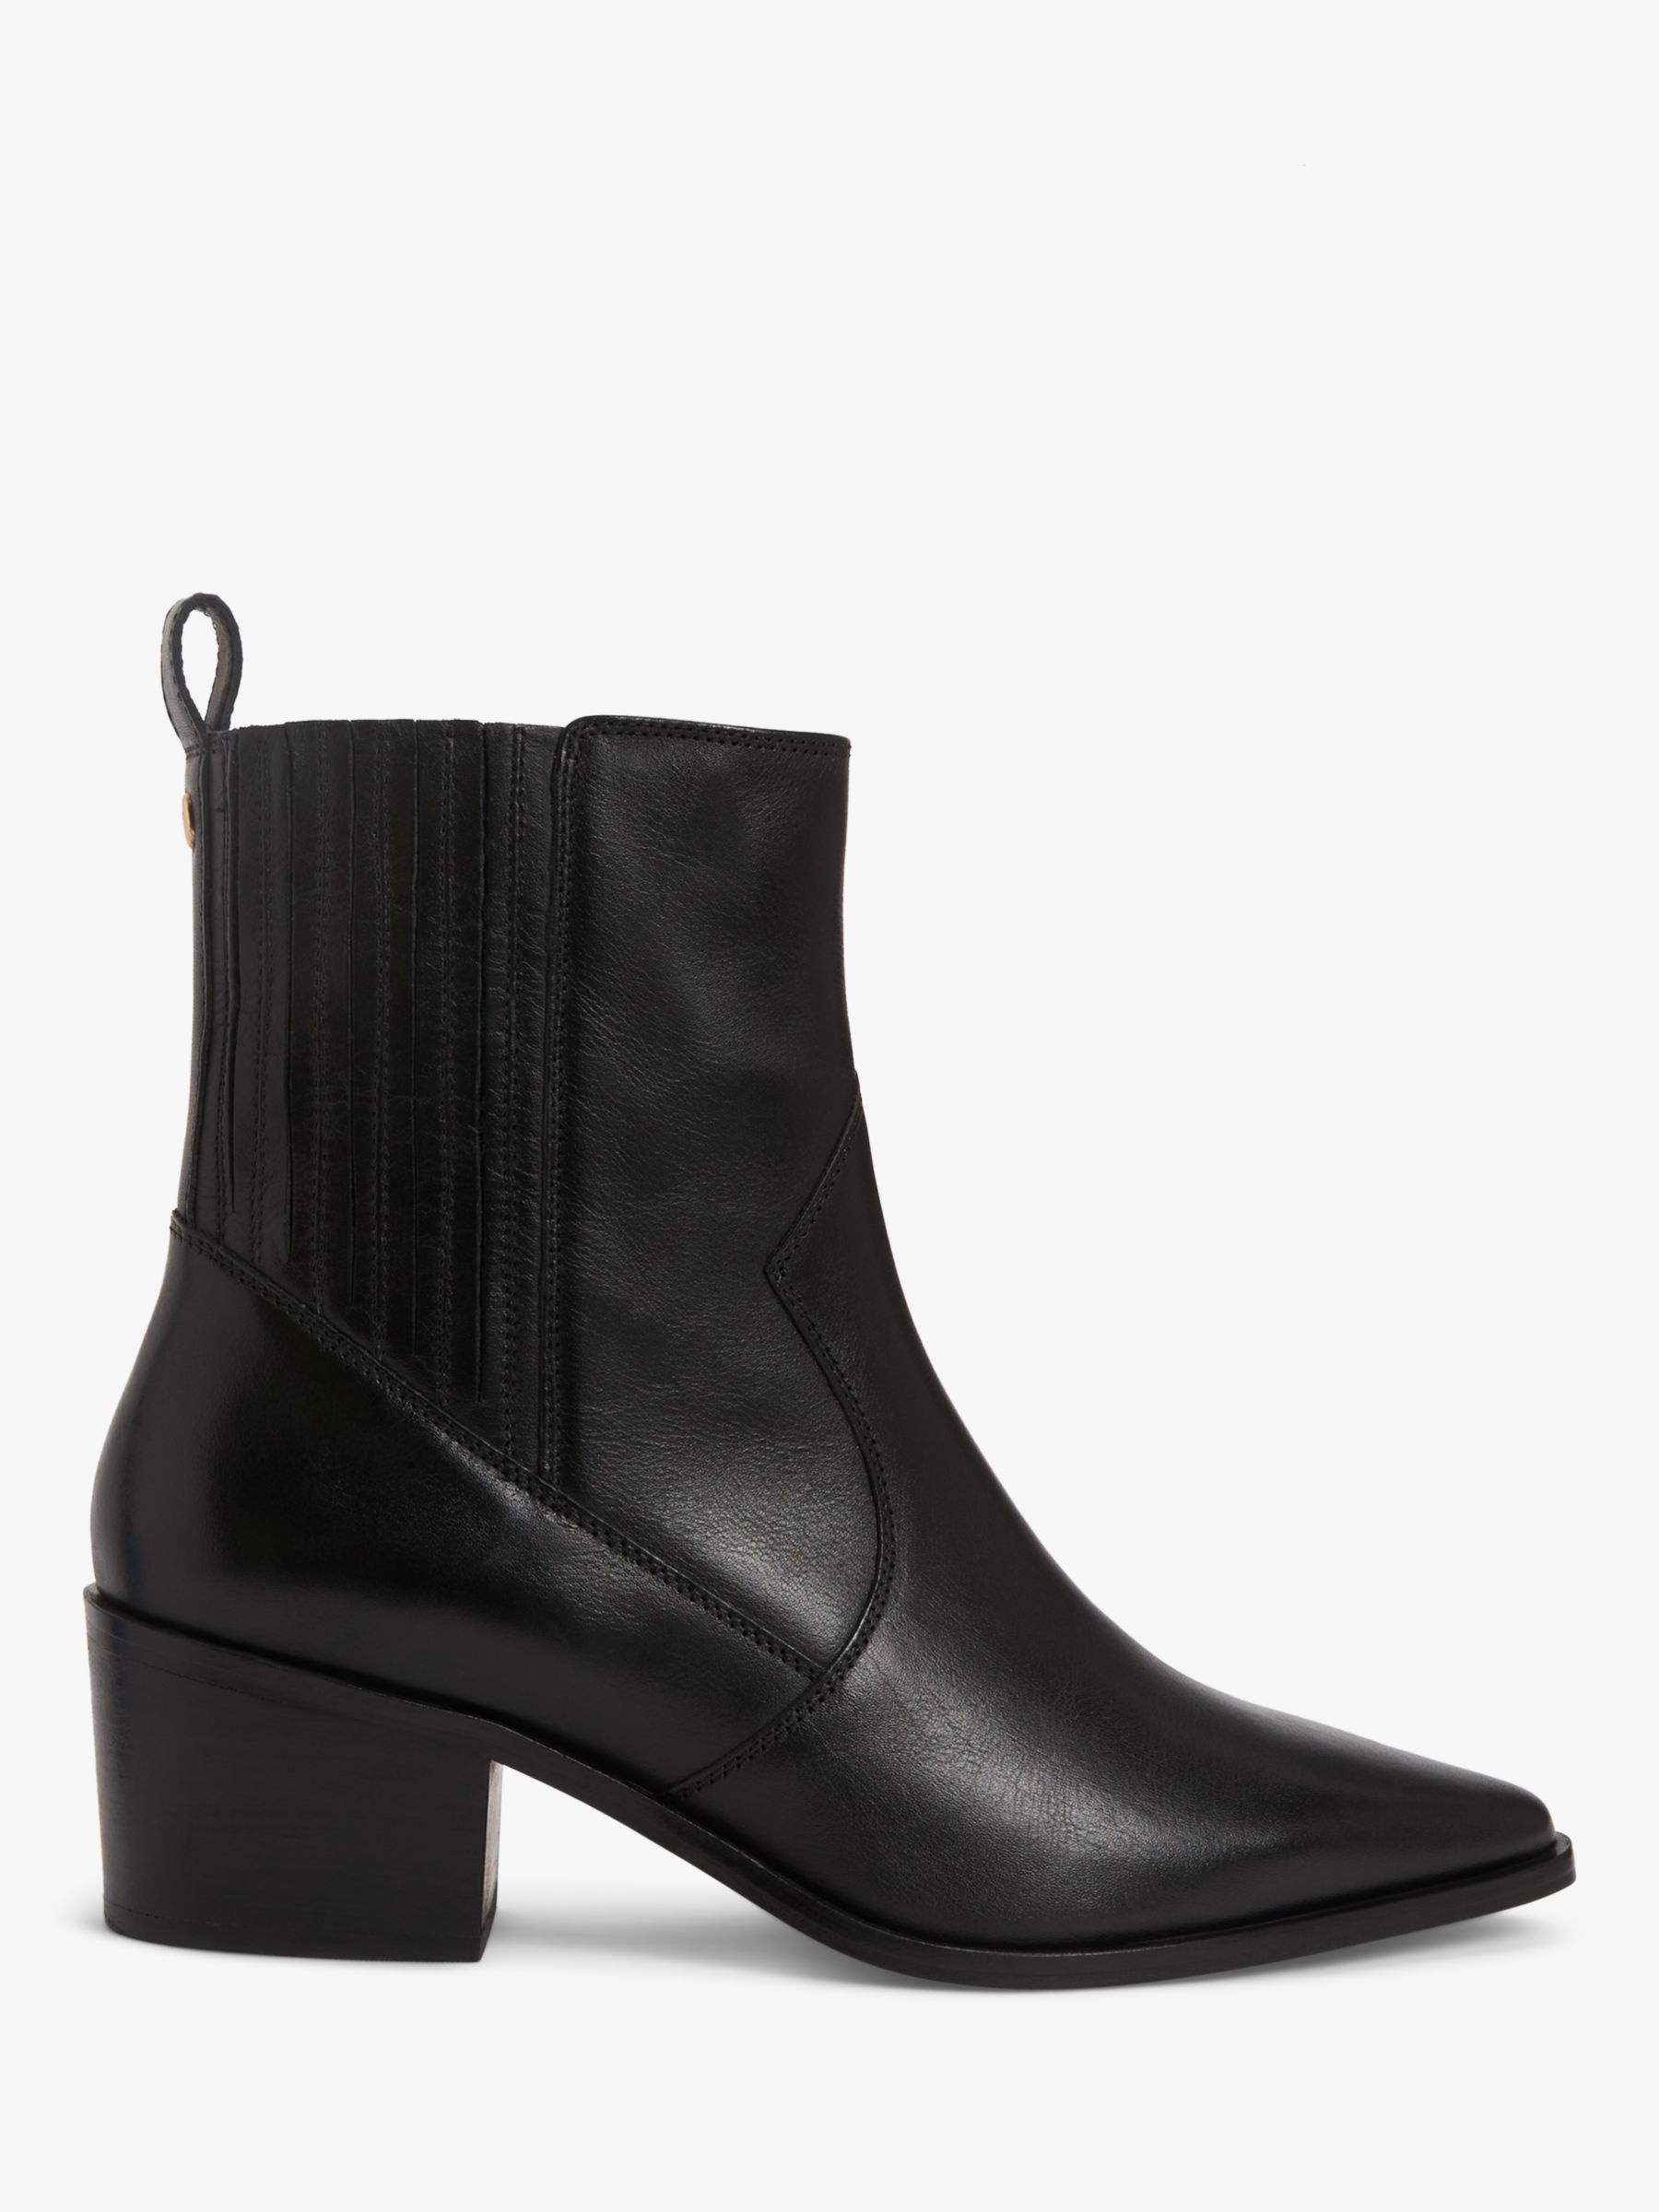 AND/OR Pixie Leather Heeled Chelsea Western Boots, Black at John Lewis ...